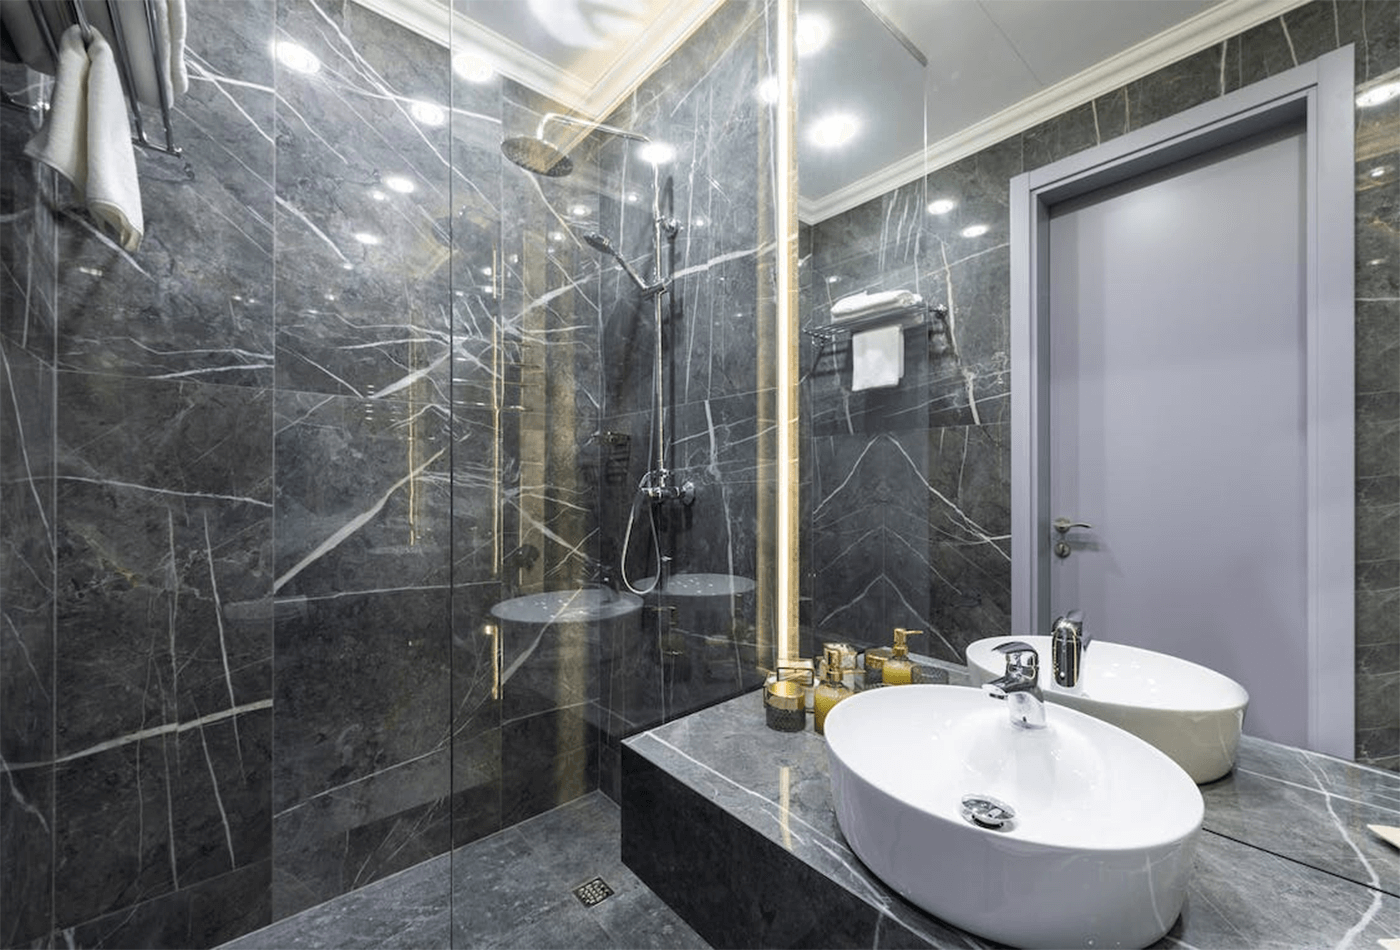 Nero marquina Marble, The Finest stone Collection